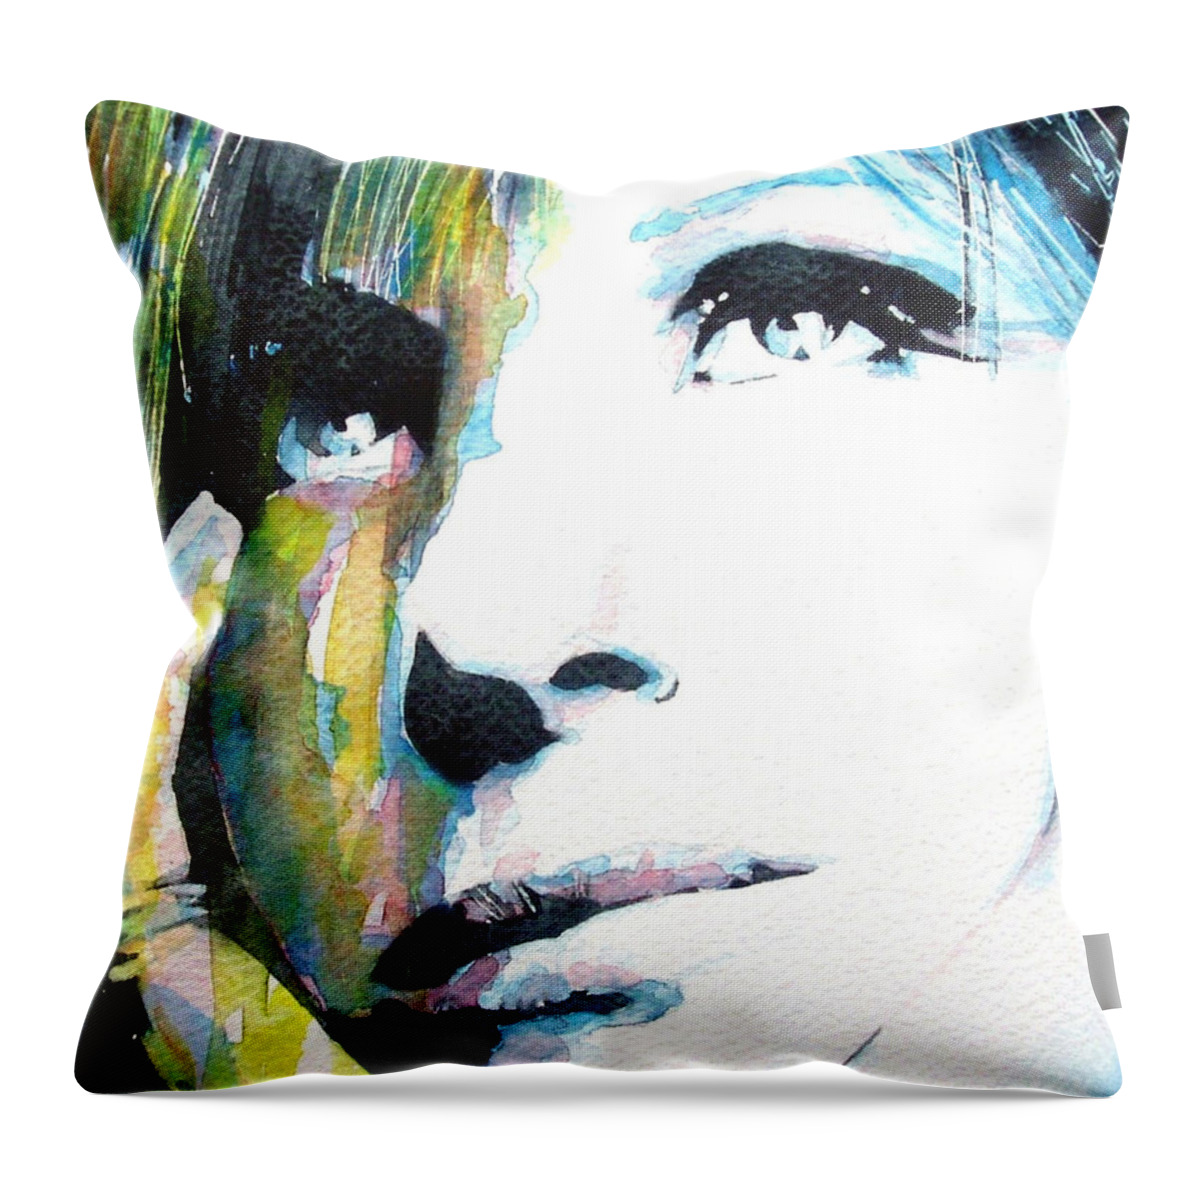 The Wonderful Barbara Streisand Caught In Waterrcolor Throw Pillow featuring the painting Barbra Streisand by Paul Lovering